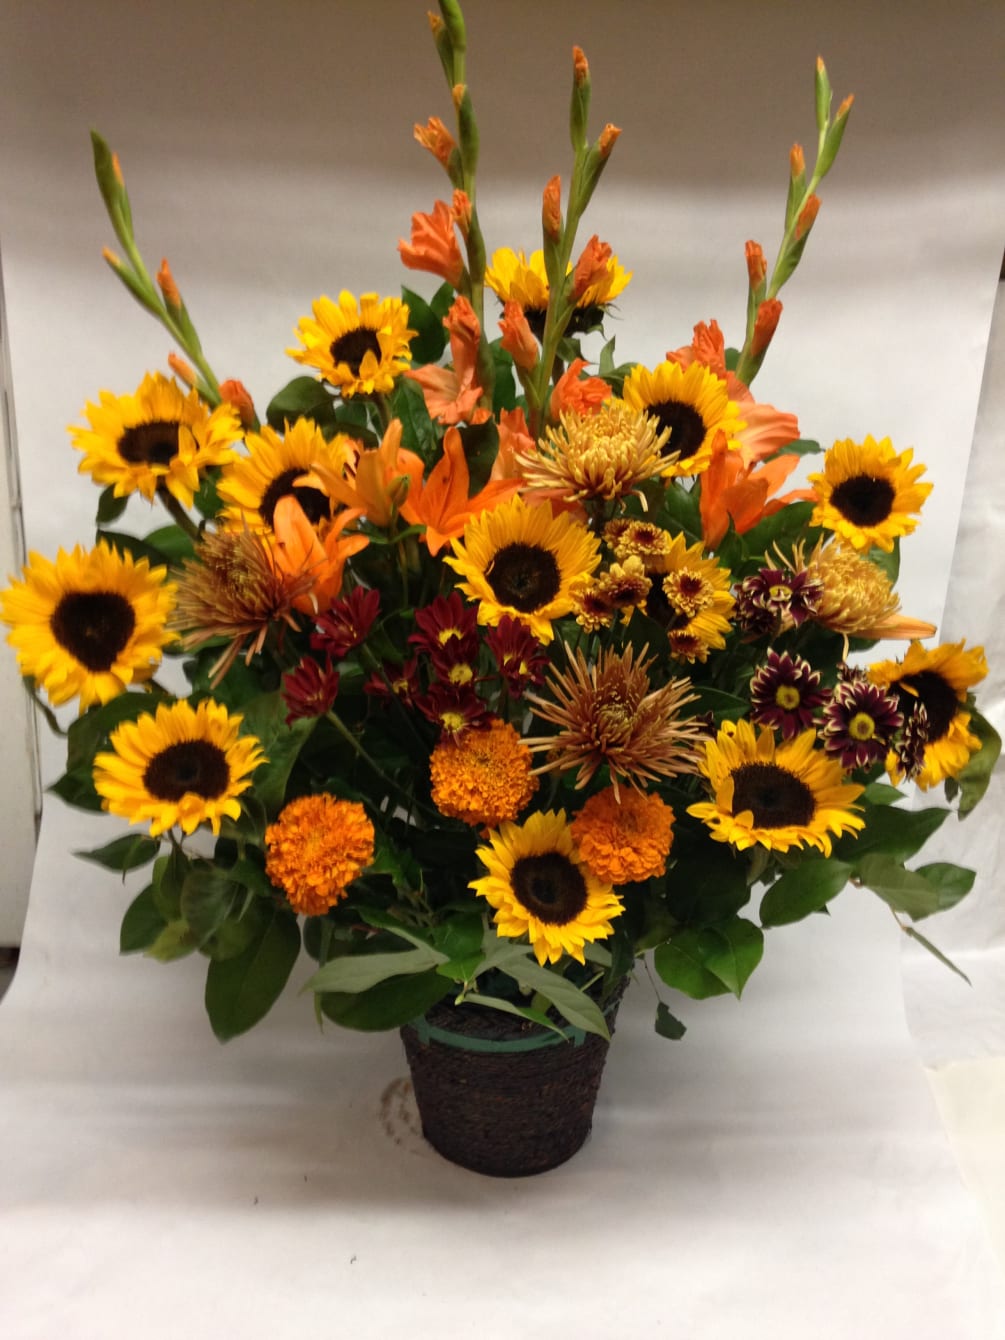 This large presentation piece comes complete with sunflowers, asiatic lilies, orange gladiolas